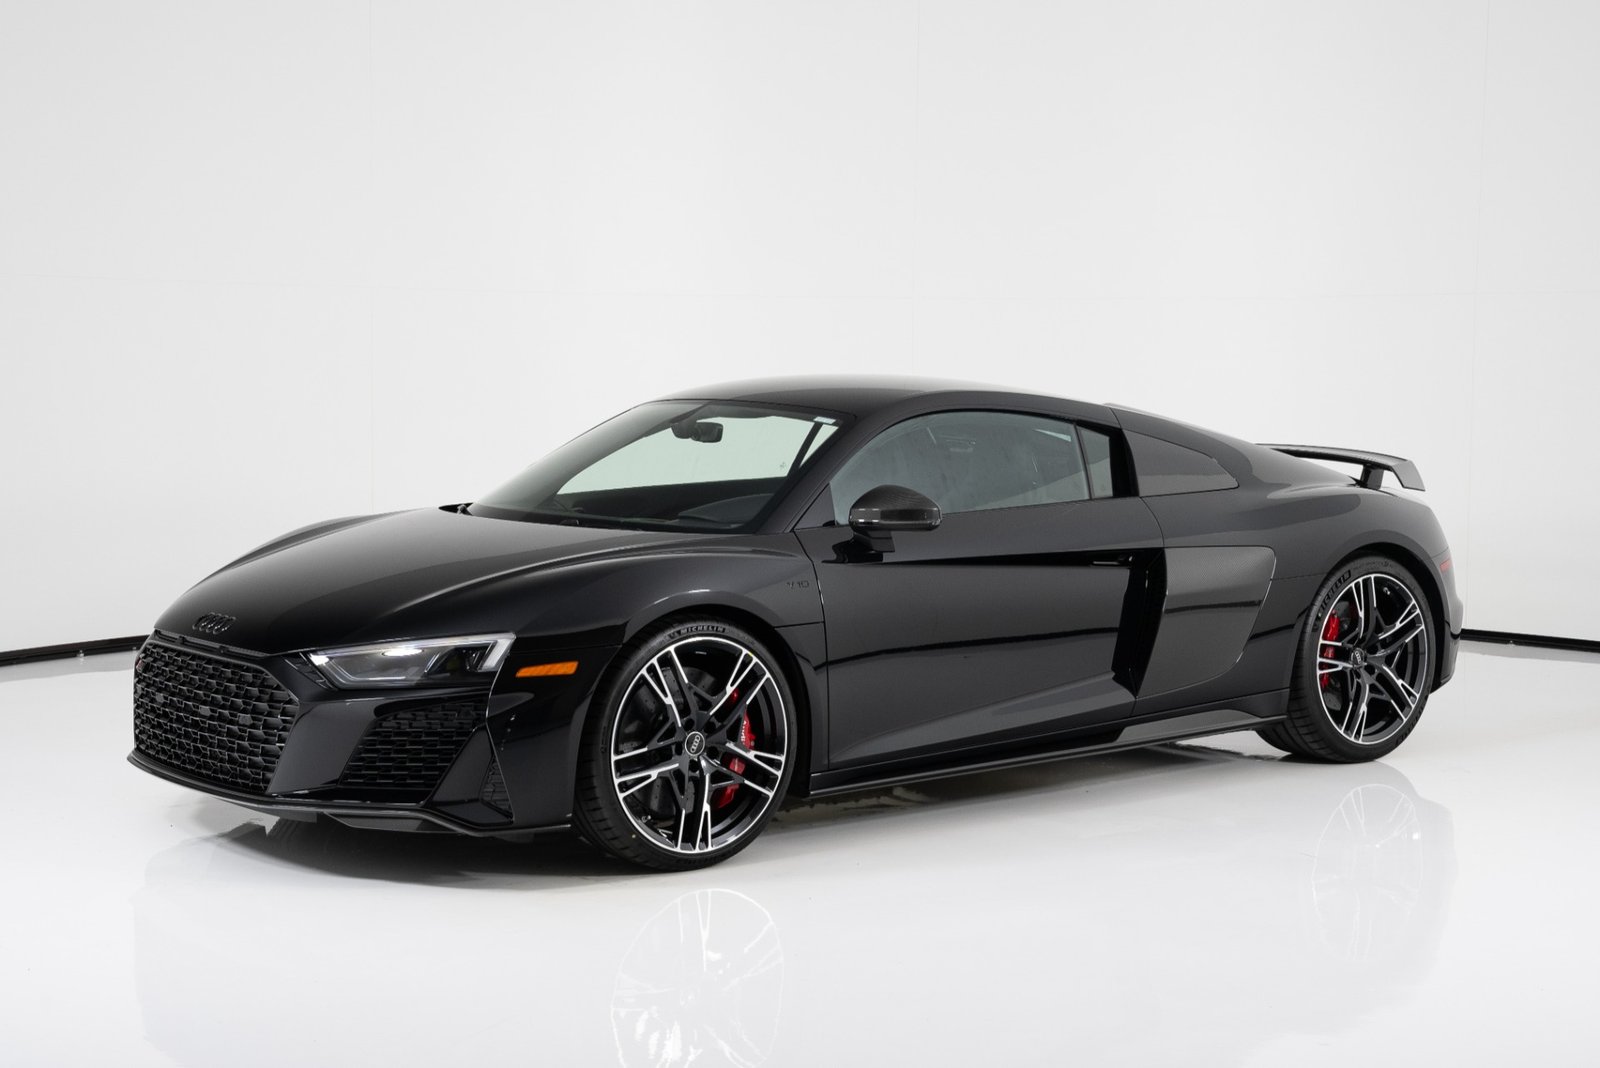 New 2023 AUDI R8 COUPE V10 PERFORMANCE ALL WHEEL DRIVE (29)